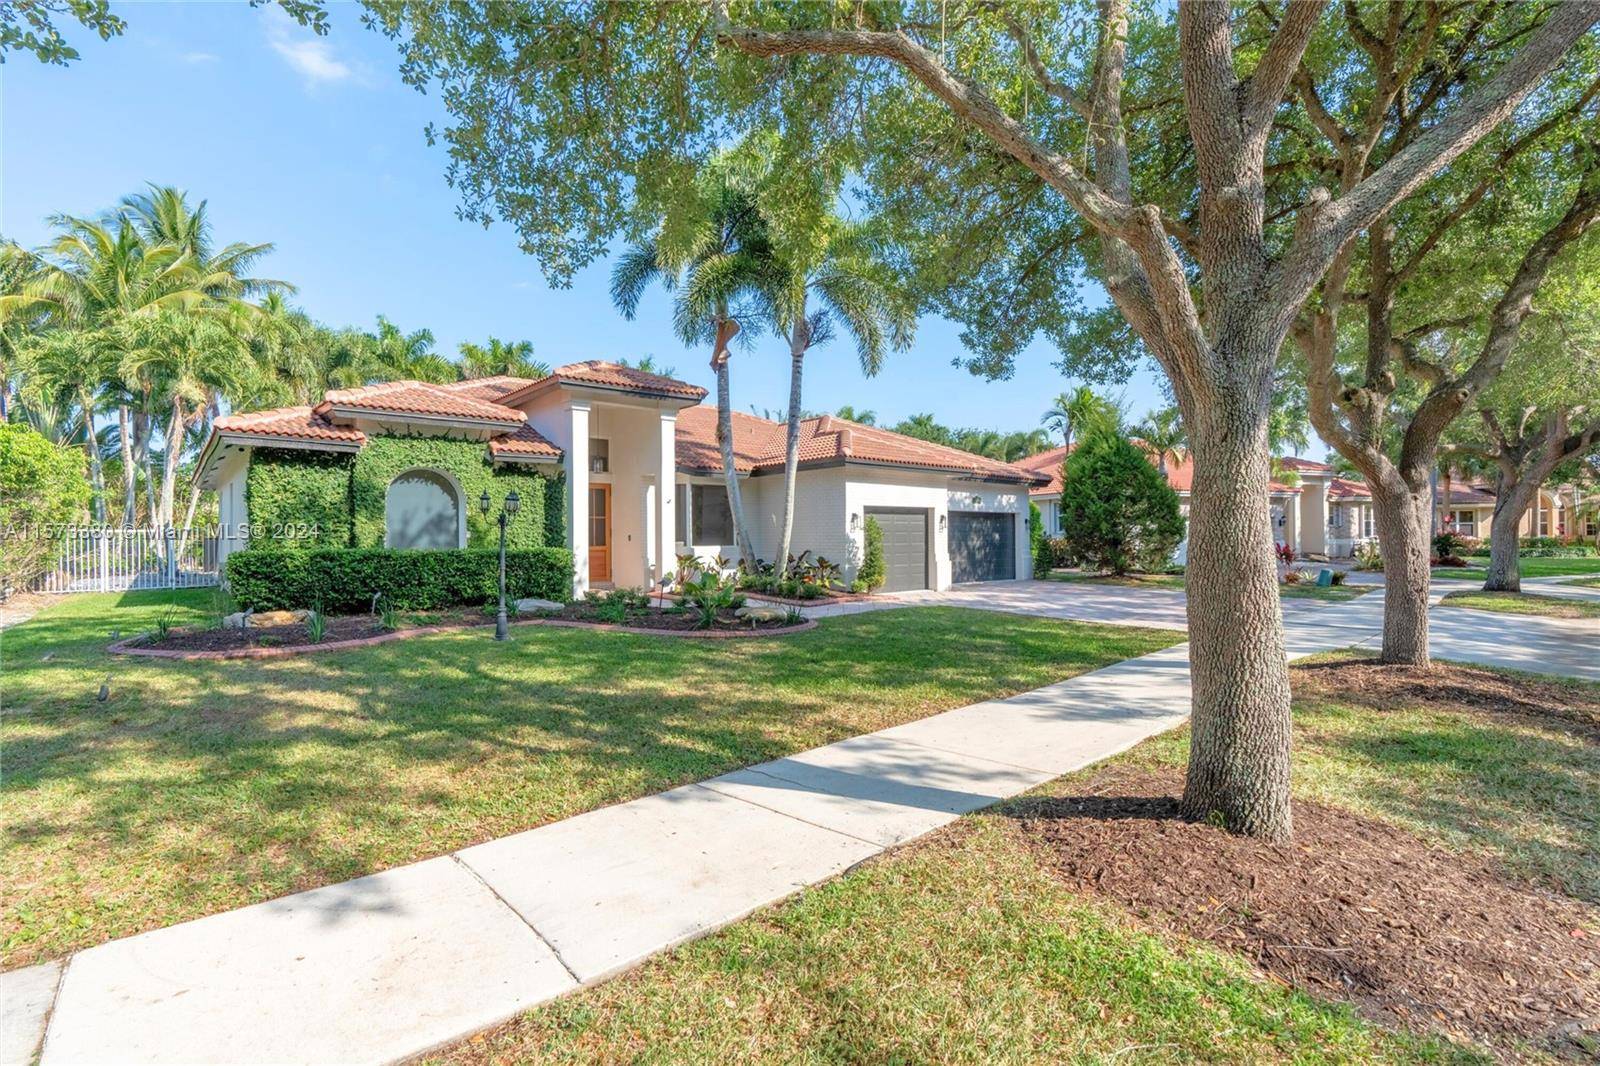 Welcome to this stunning ranch style home in Country Glen, Cooper City.